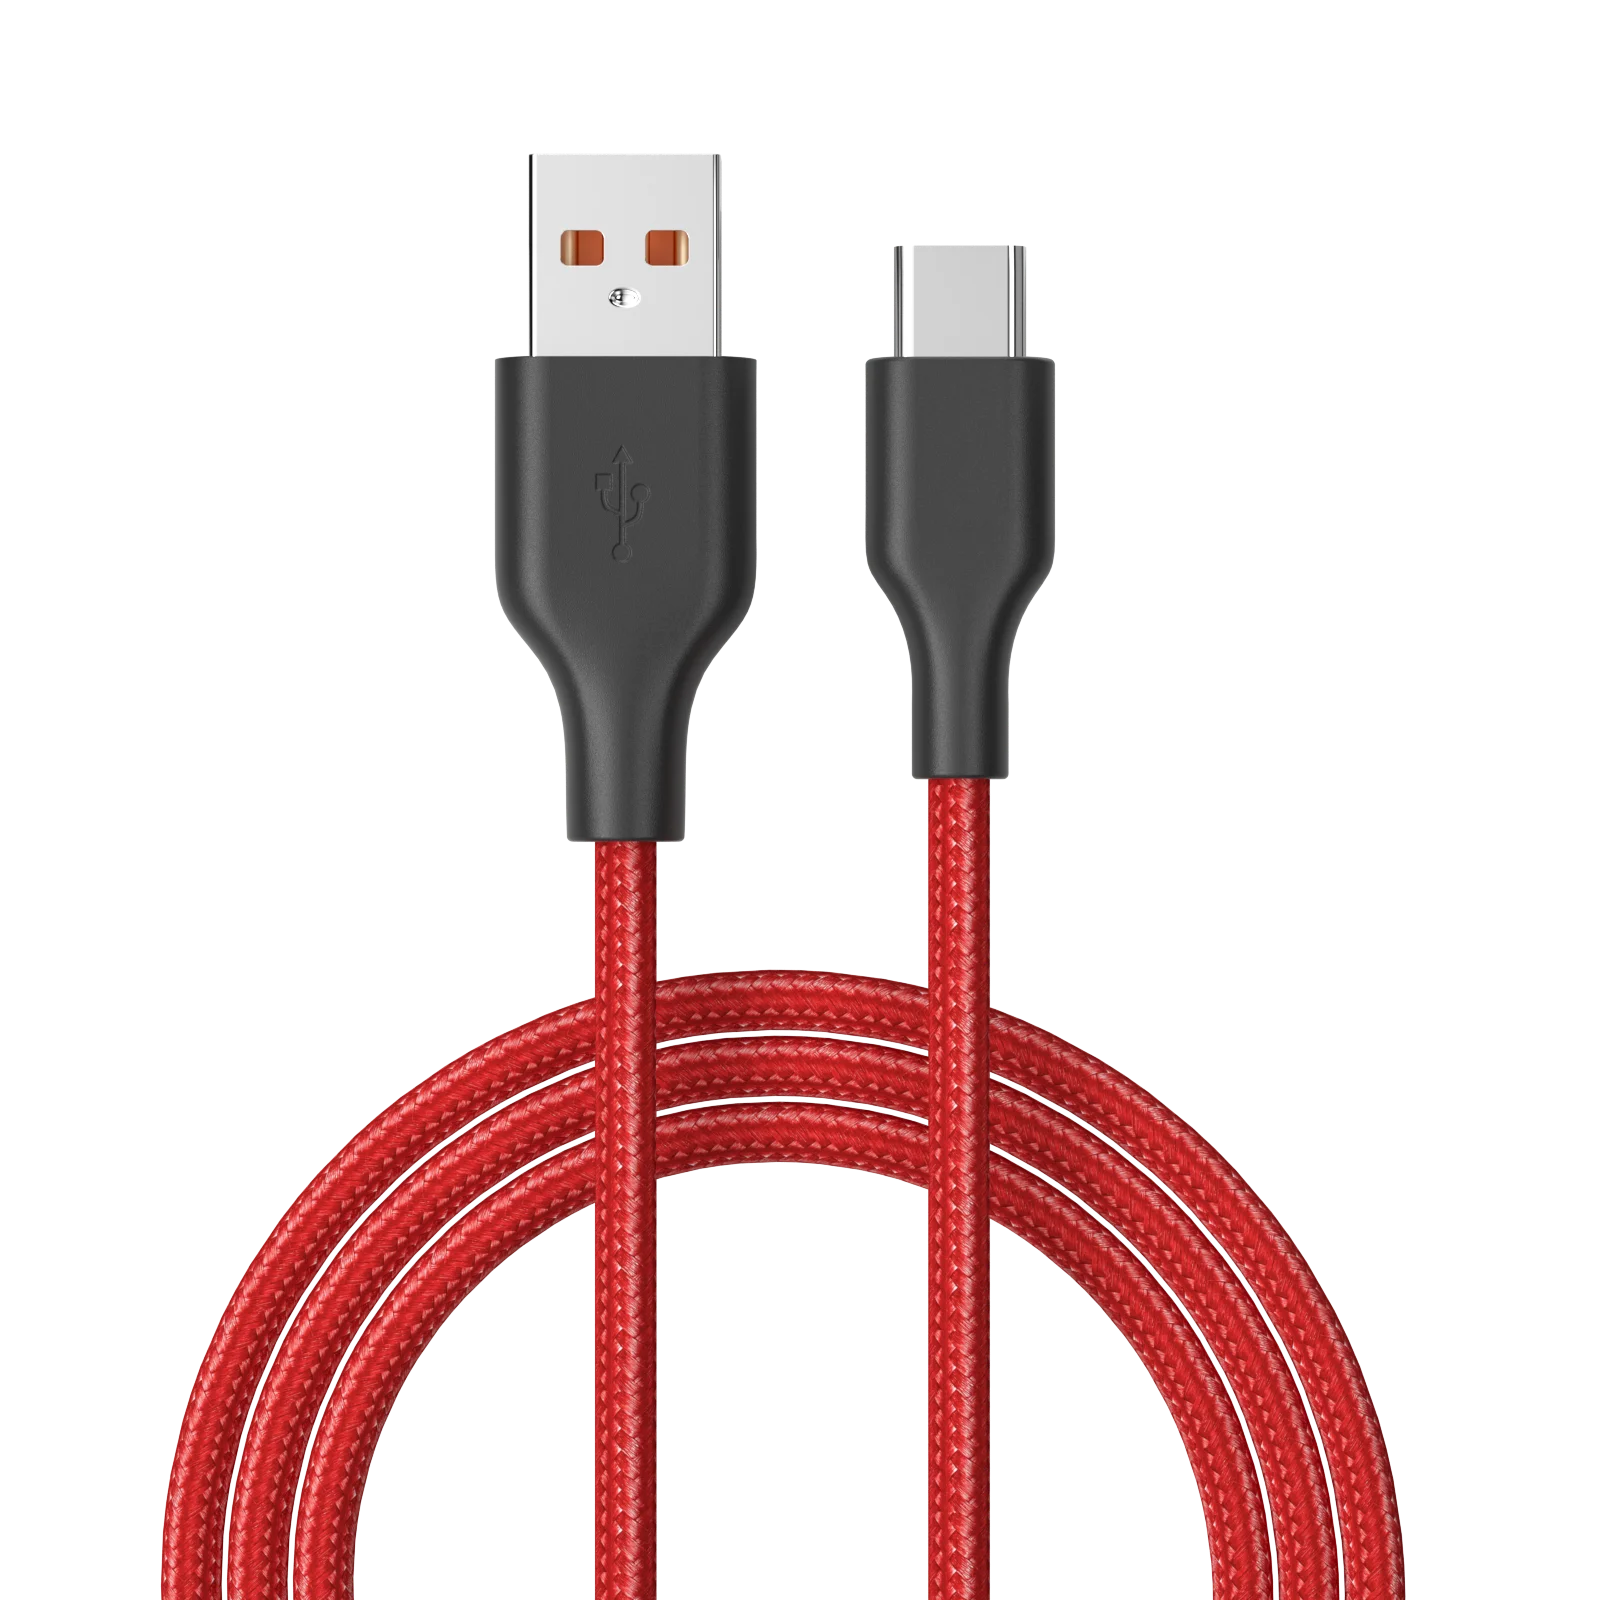 

PUJIMAX 5V2A type c cable usb charger usb-c fast charging data cable nylon braided universal line for mobile phone devices, Black,red,grey